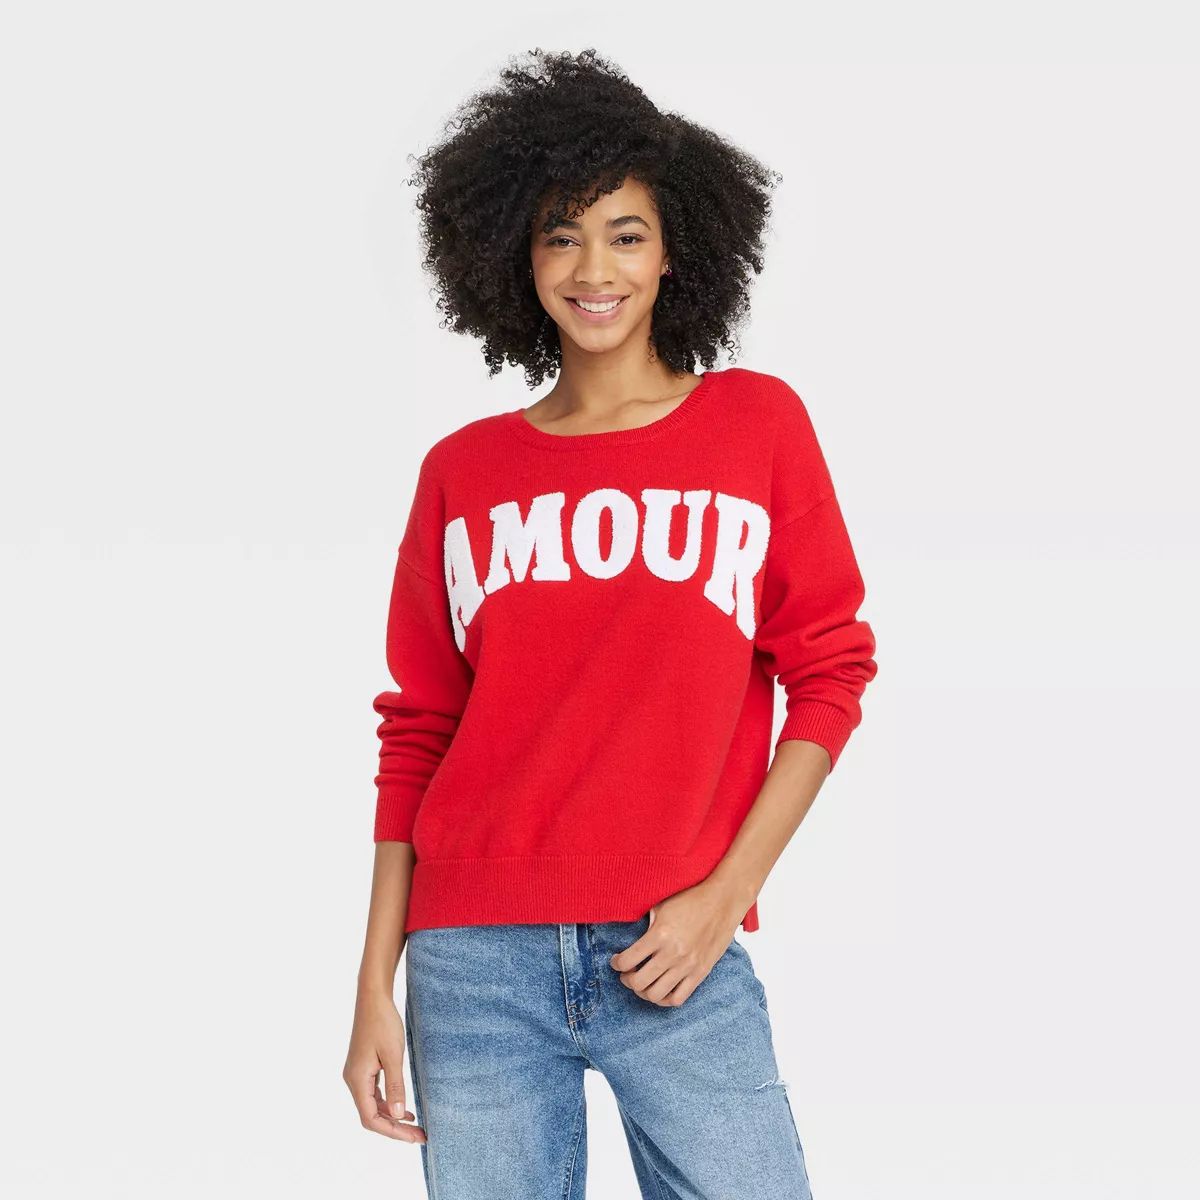 Women's Amour Graphic Sweater - Red | Target